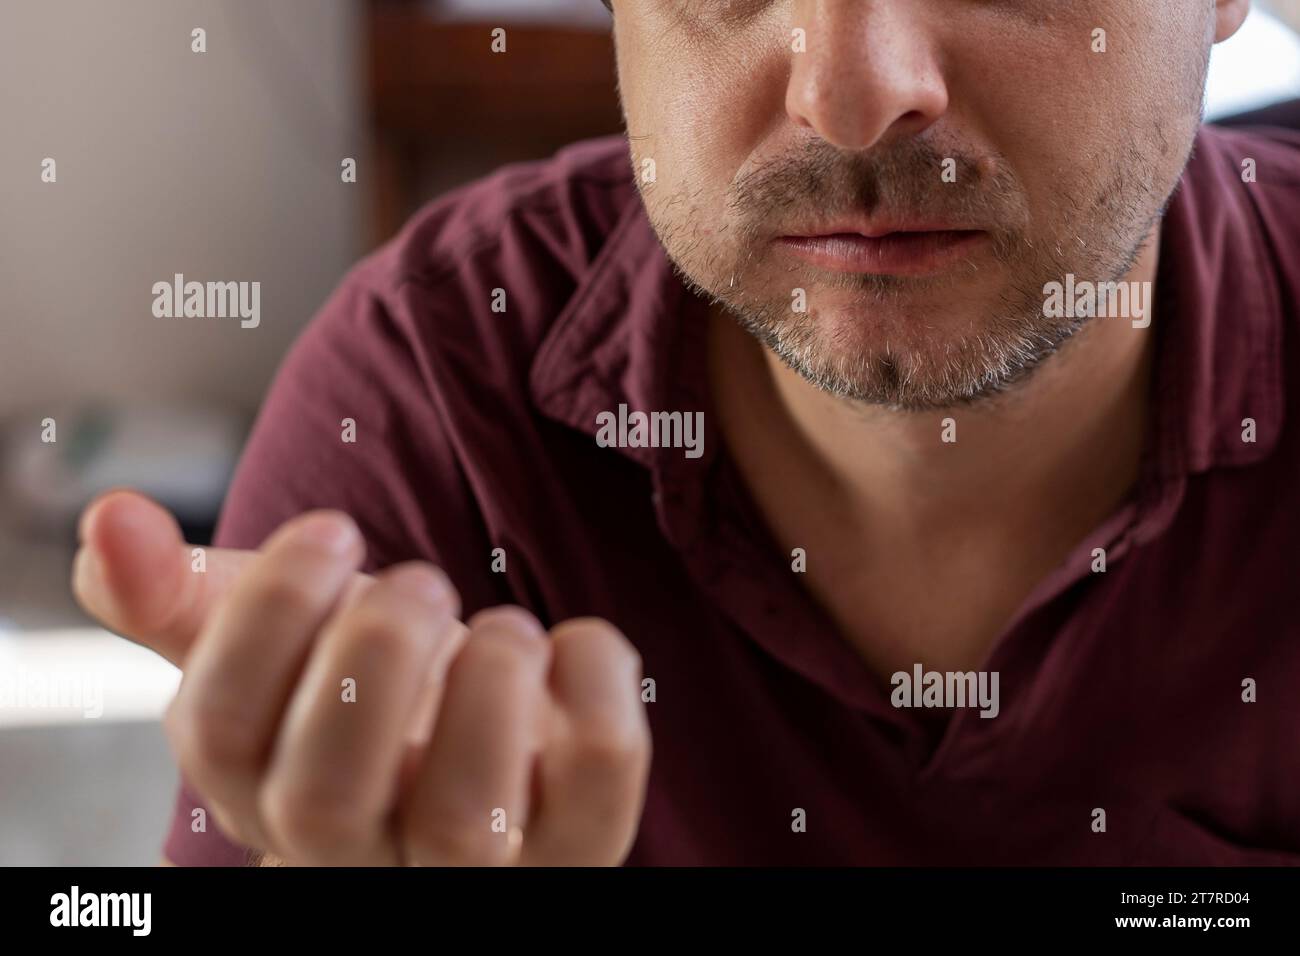 man chews a piece of homemade cucumber with his mouth closed Stock Photo